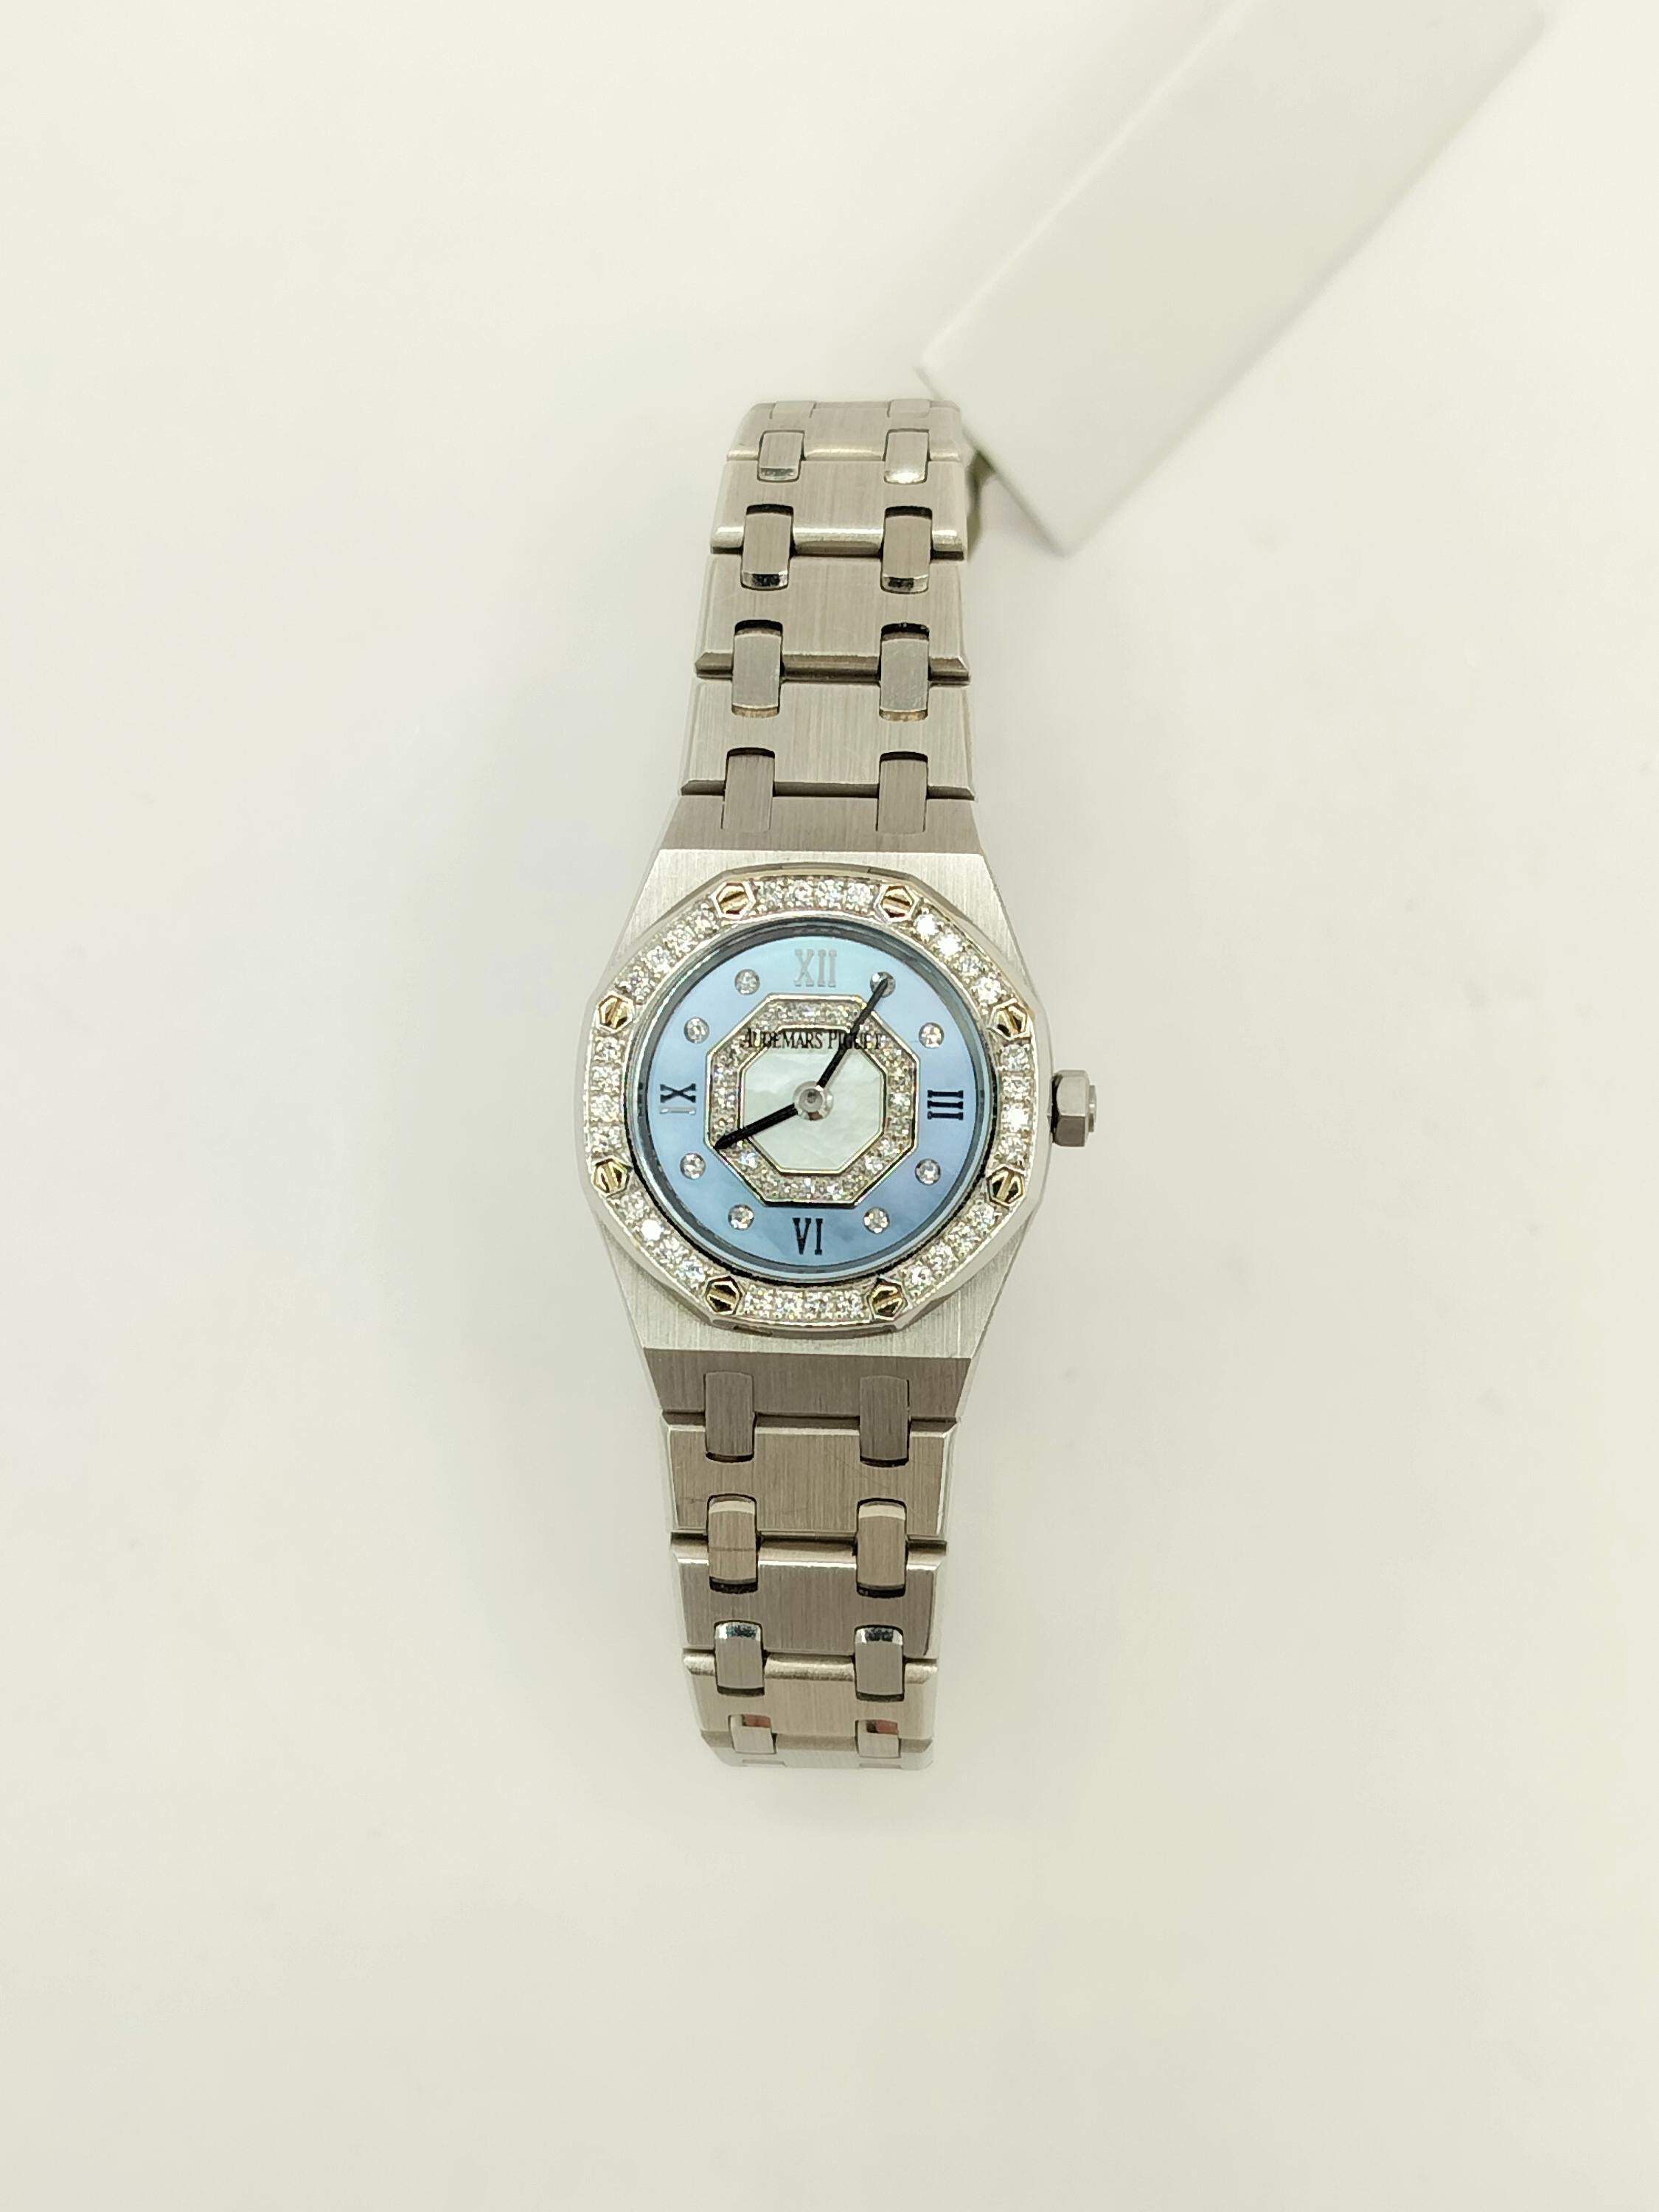 Estate Audemars Piguet Royal Oak Diamond and Mother of Pearl 24 mm 18k Watch In Excellent Condition For Sale In Los Angeles, CA